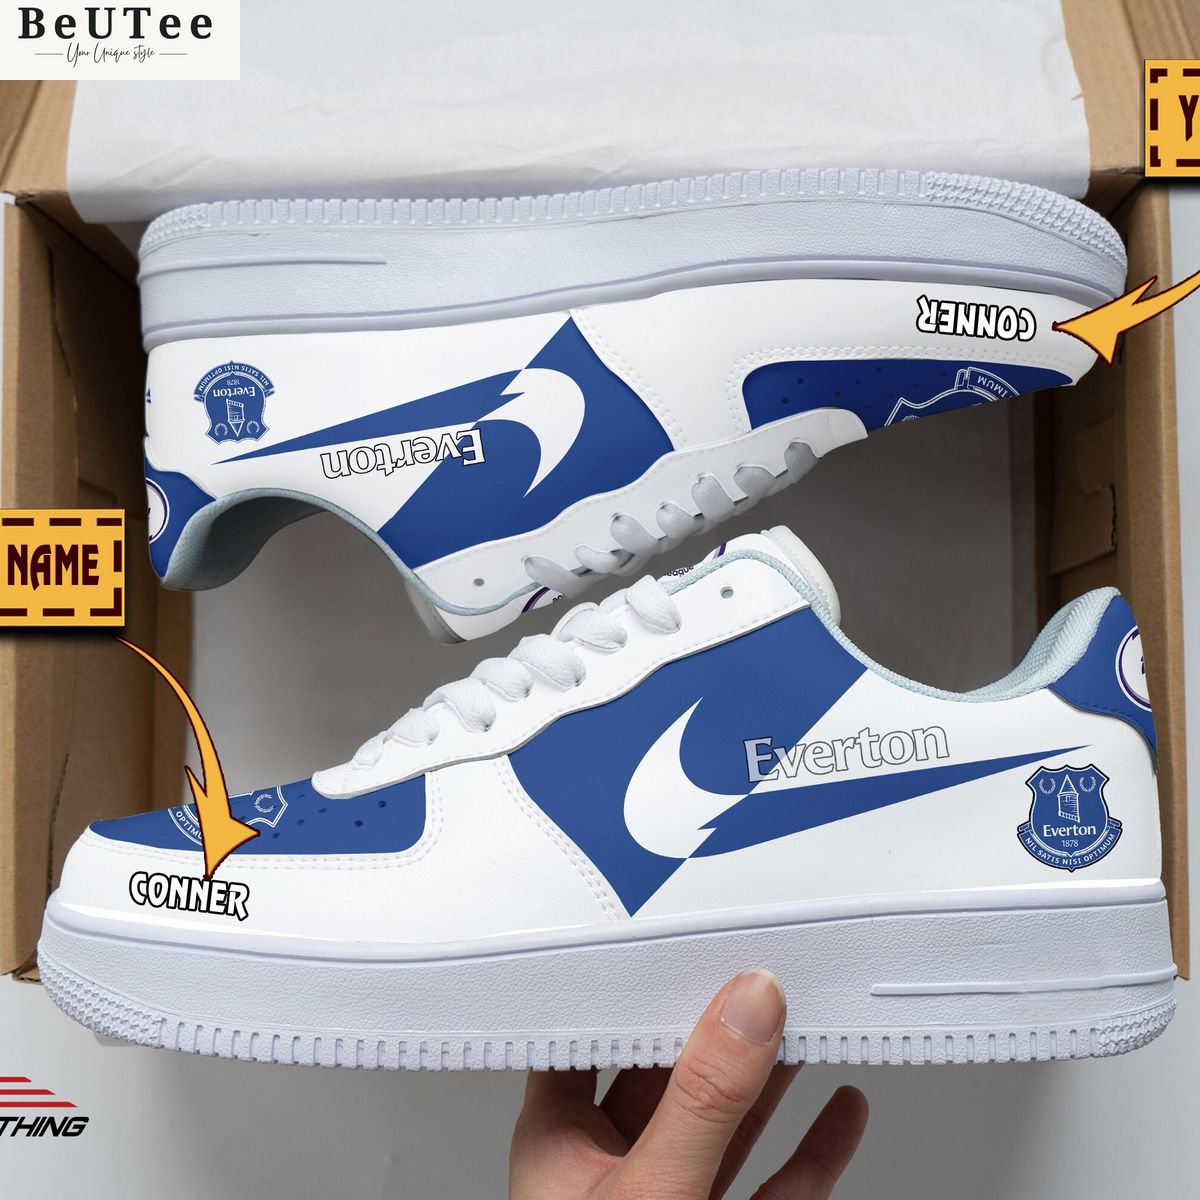 Premier League Everton F.C Personalized Air Force 1 Shoes Cuteness overloaded